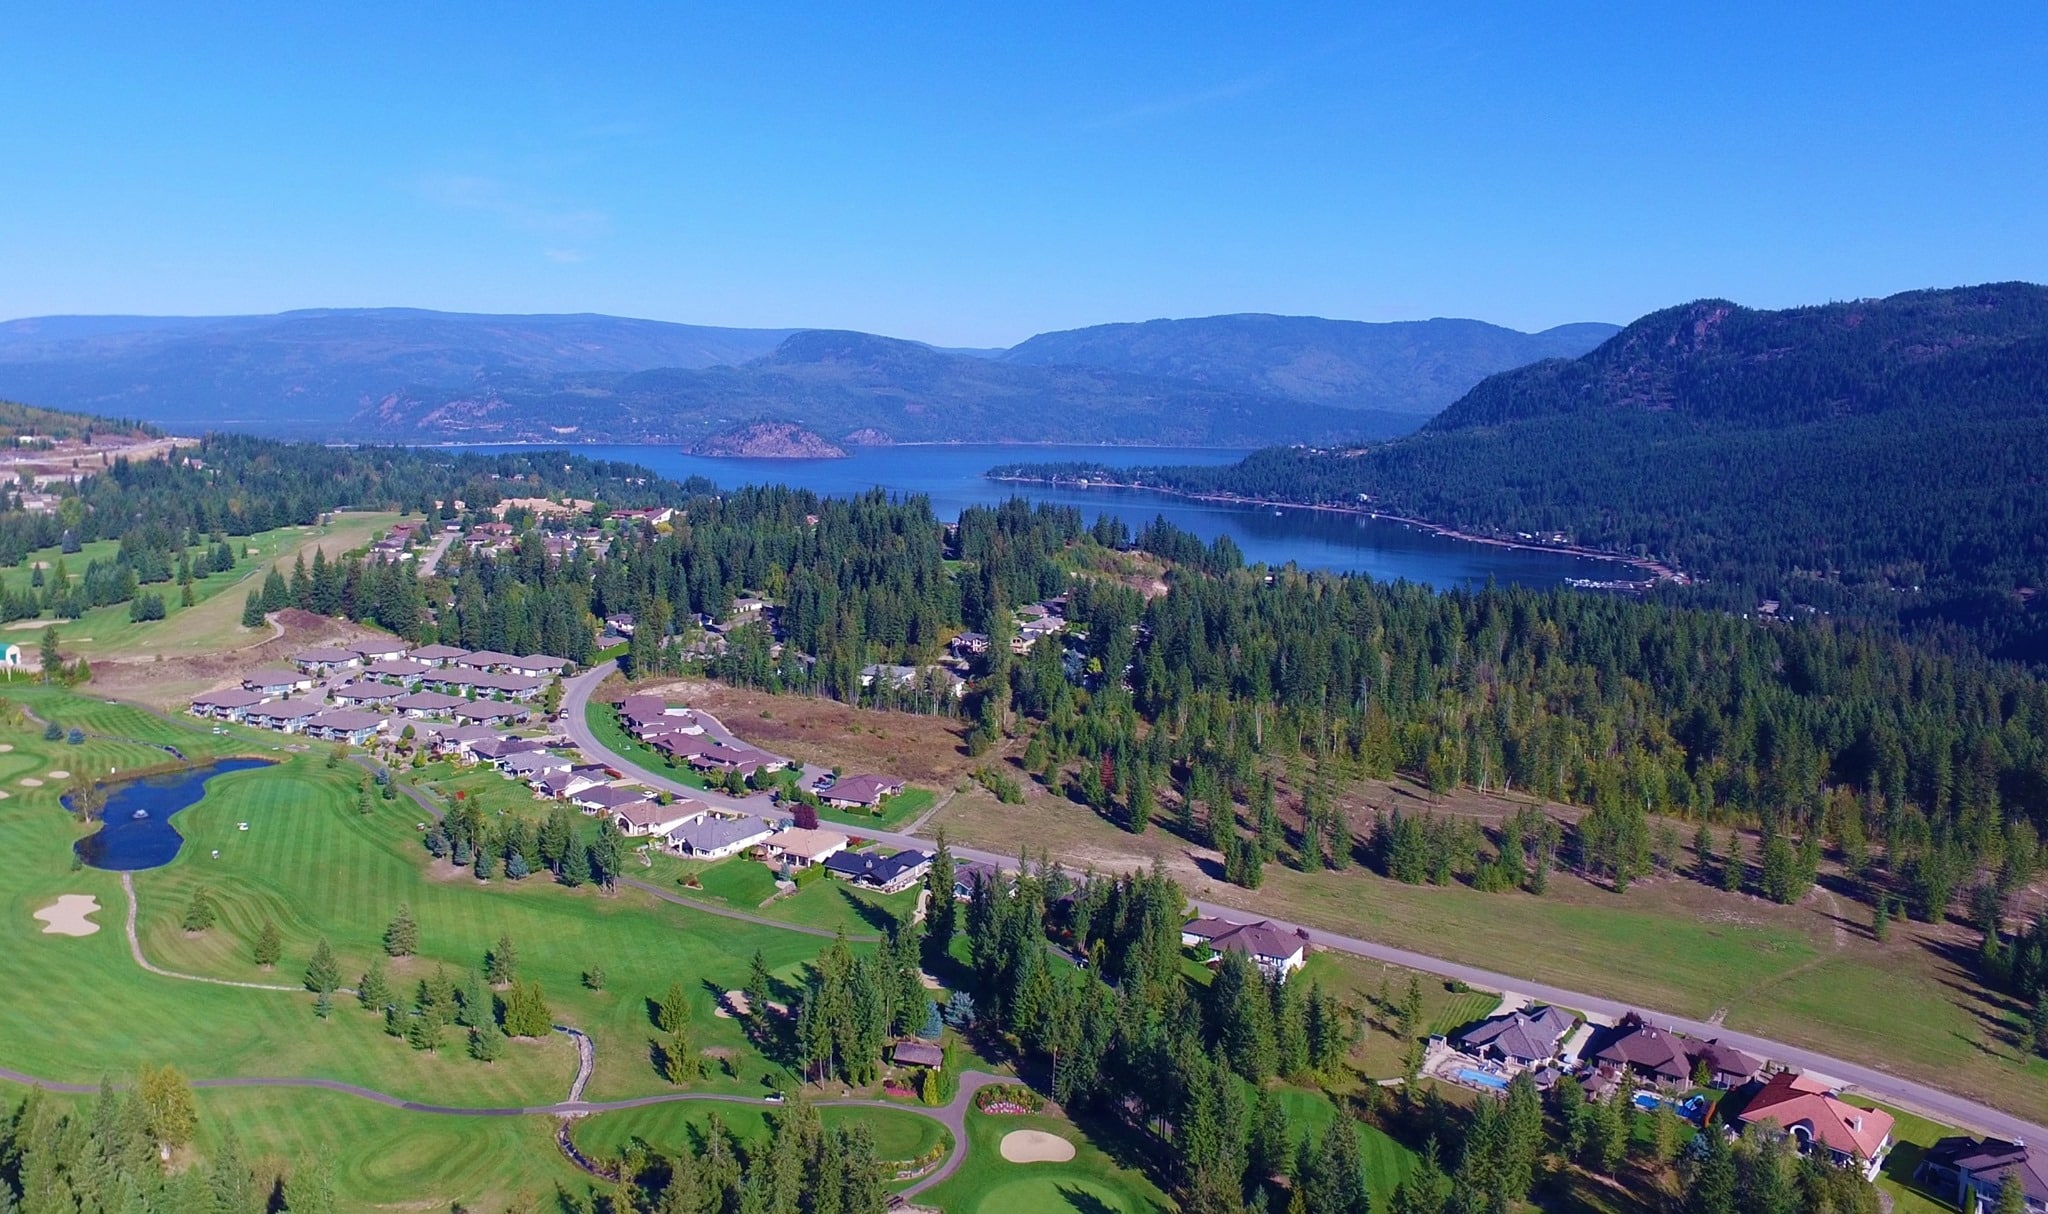 Shuswap Lake Estates: For over 50 years, Shuswap Lake Estates has been building a community that offers you the kind of lifestyle you’ve been dreaming of. Overlooking the shores of Shuswap Lake, activities […]